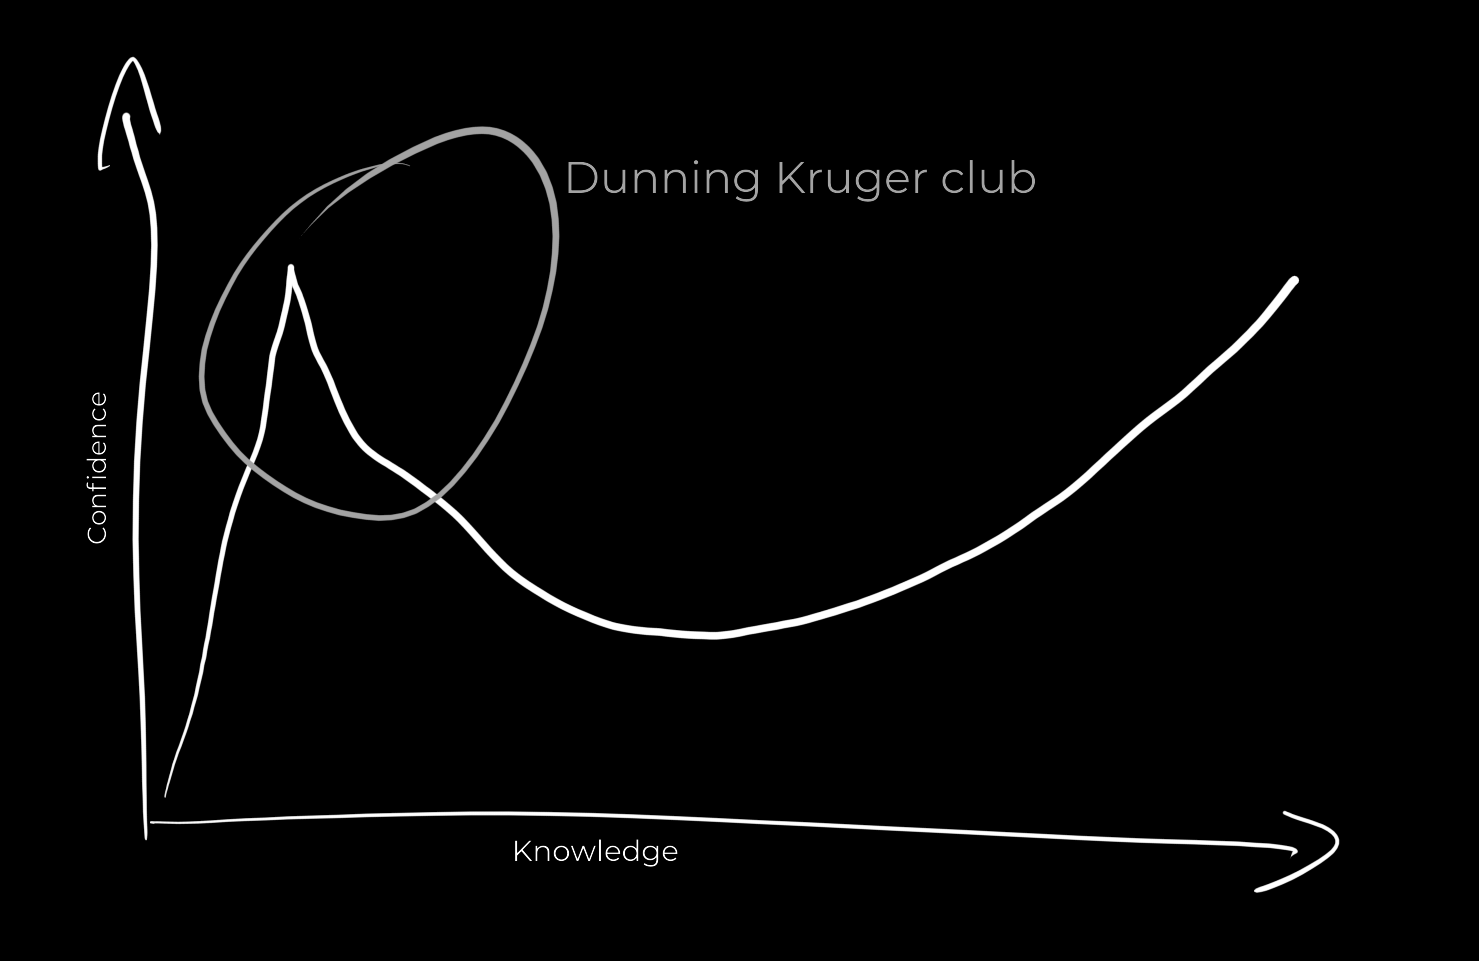 The Dunning Kruger graph